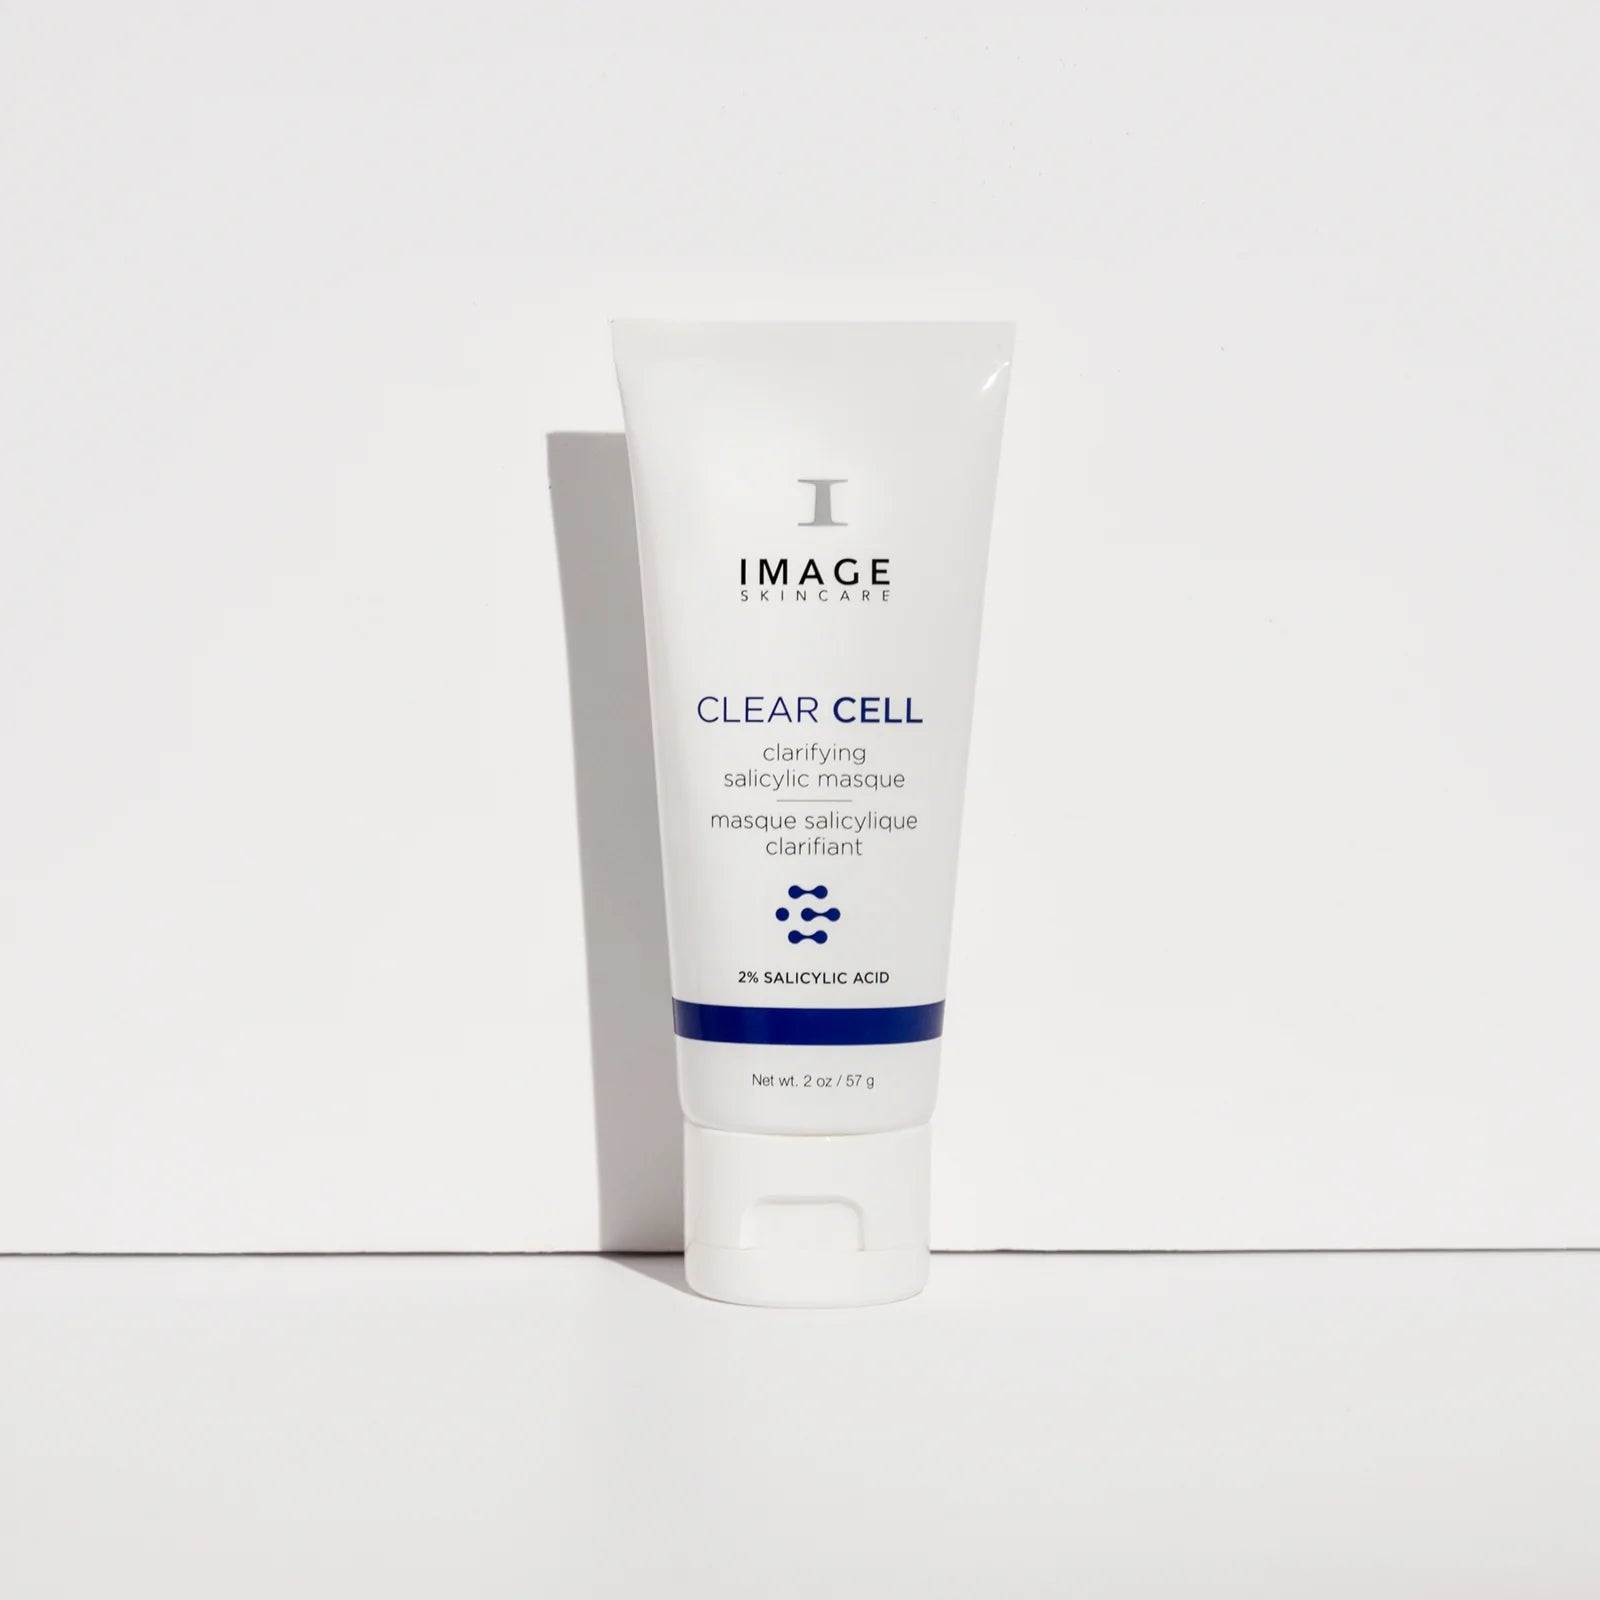 Clear Cell Medicated Acne Masque